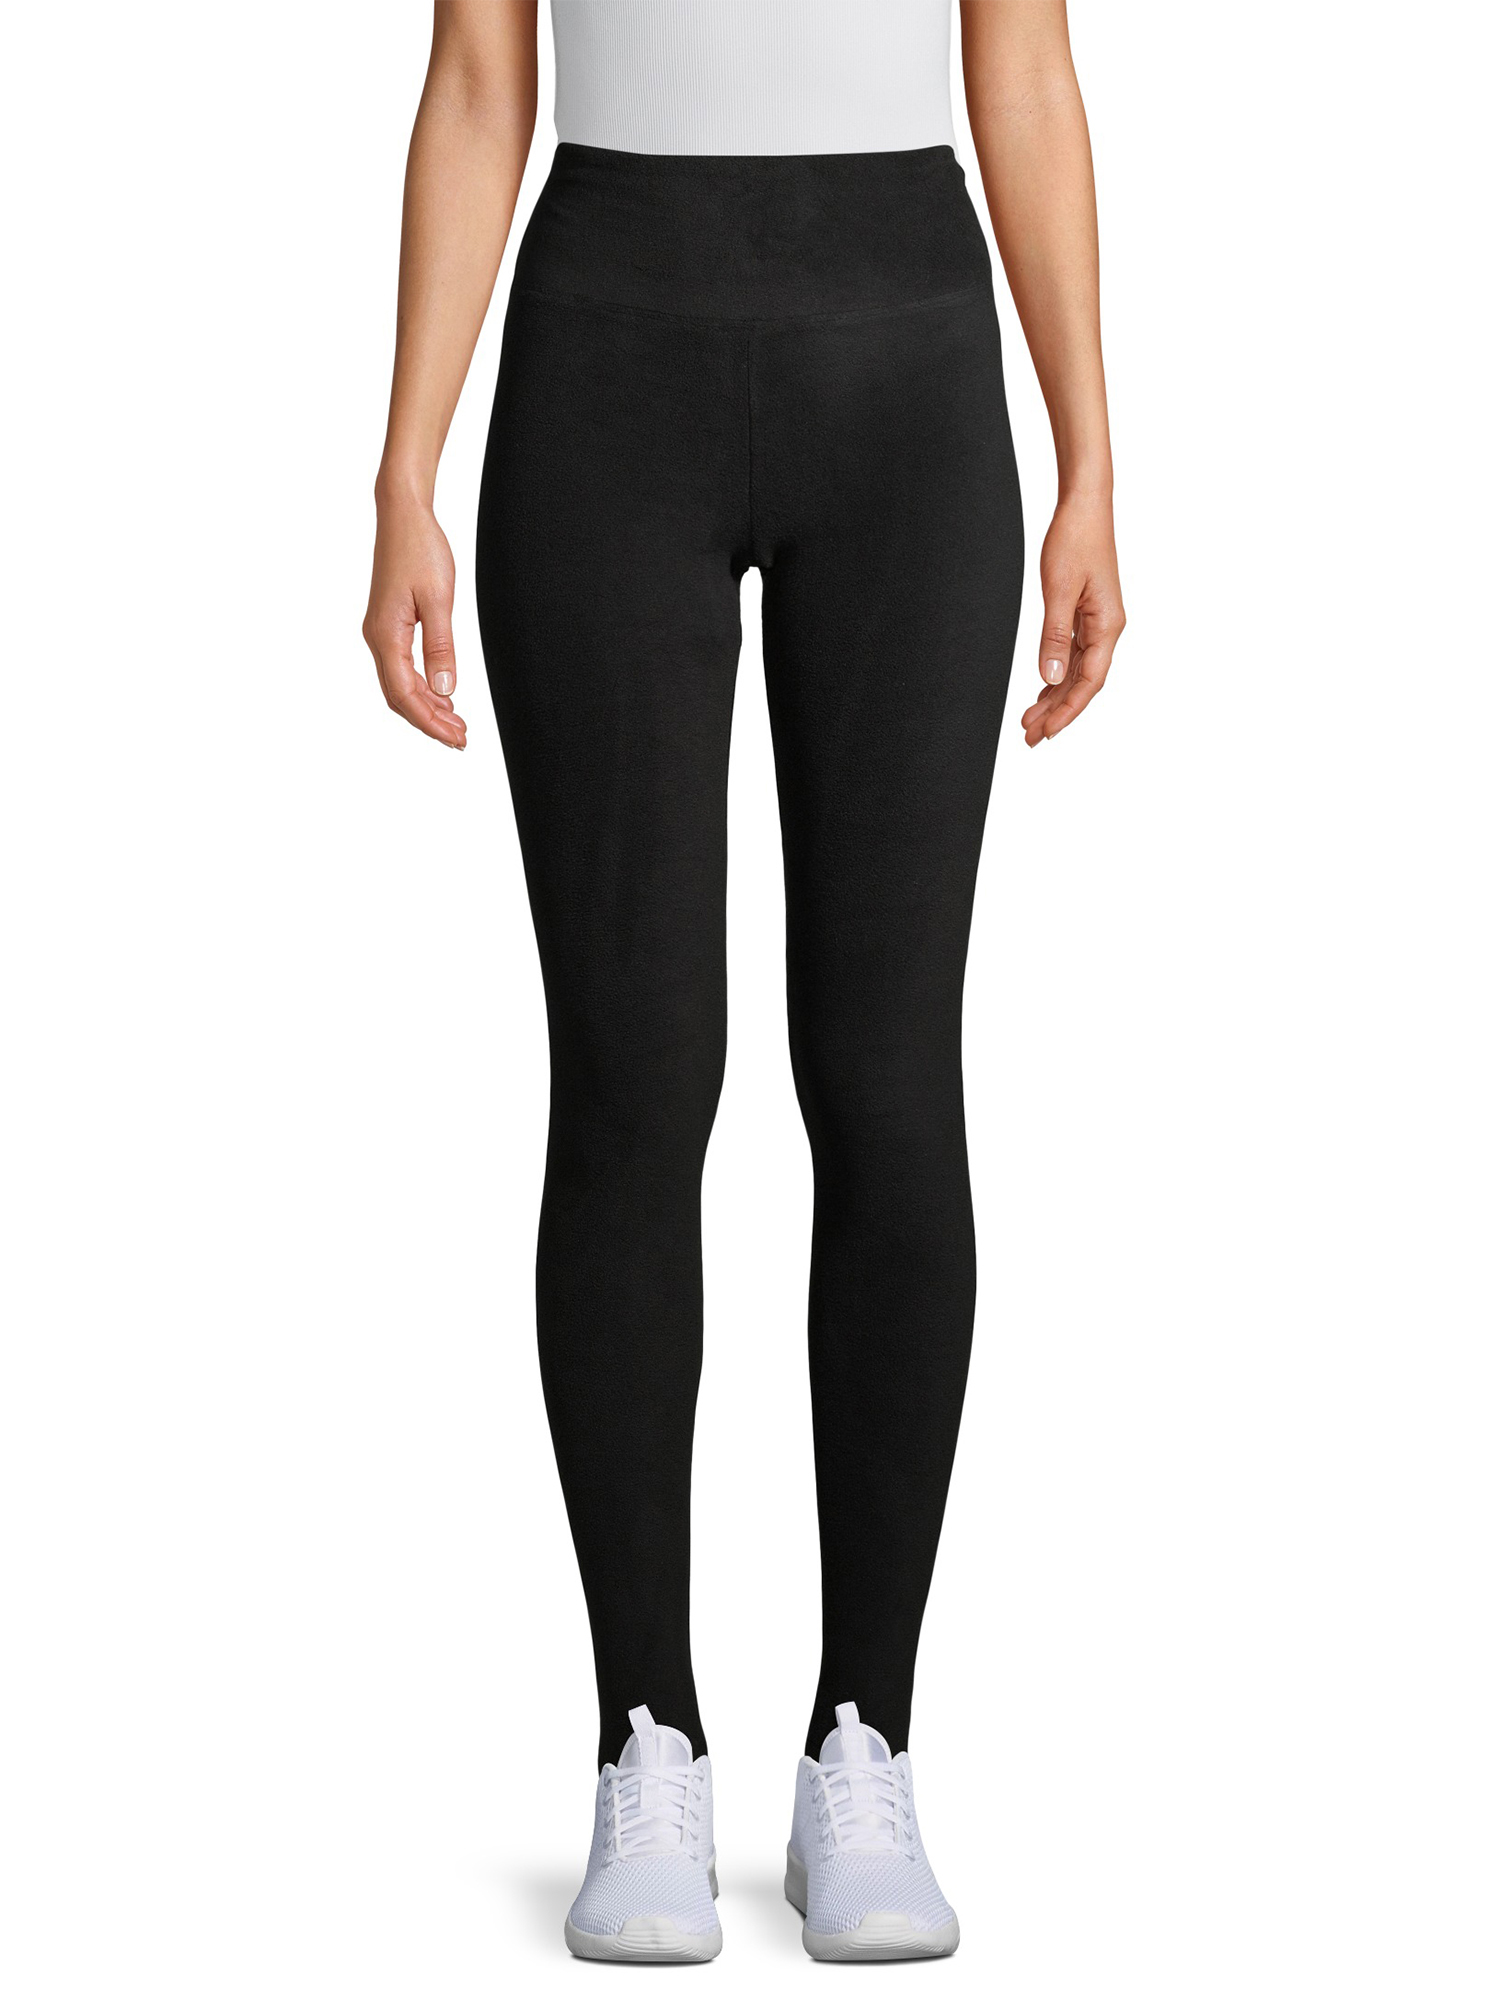 ClimateRight by Cuddl Duds Women's Stretch Fleece Base Layer High Waisted Thermal Leggings - image 1 of 6